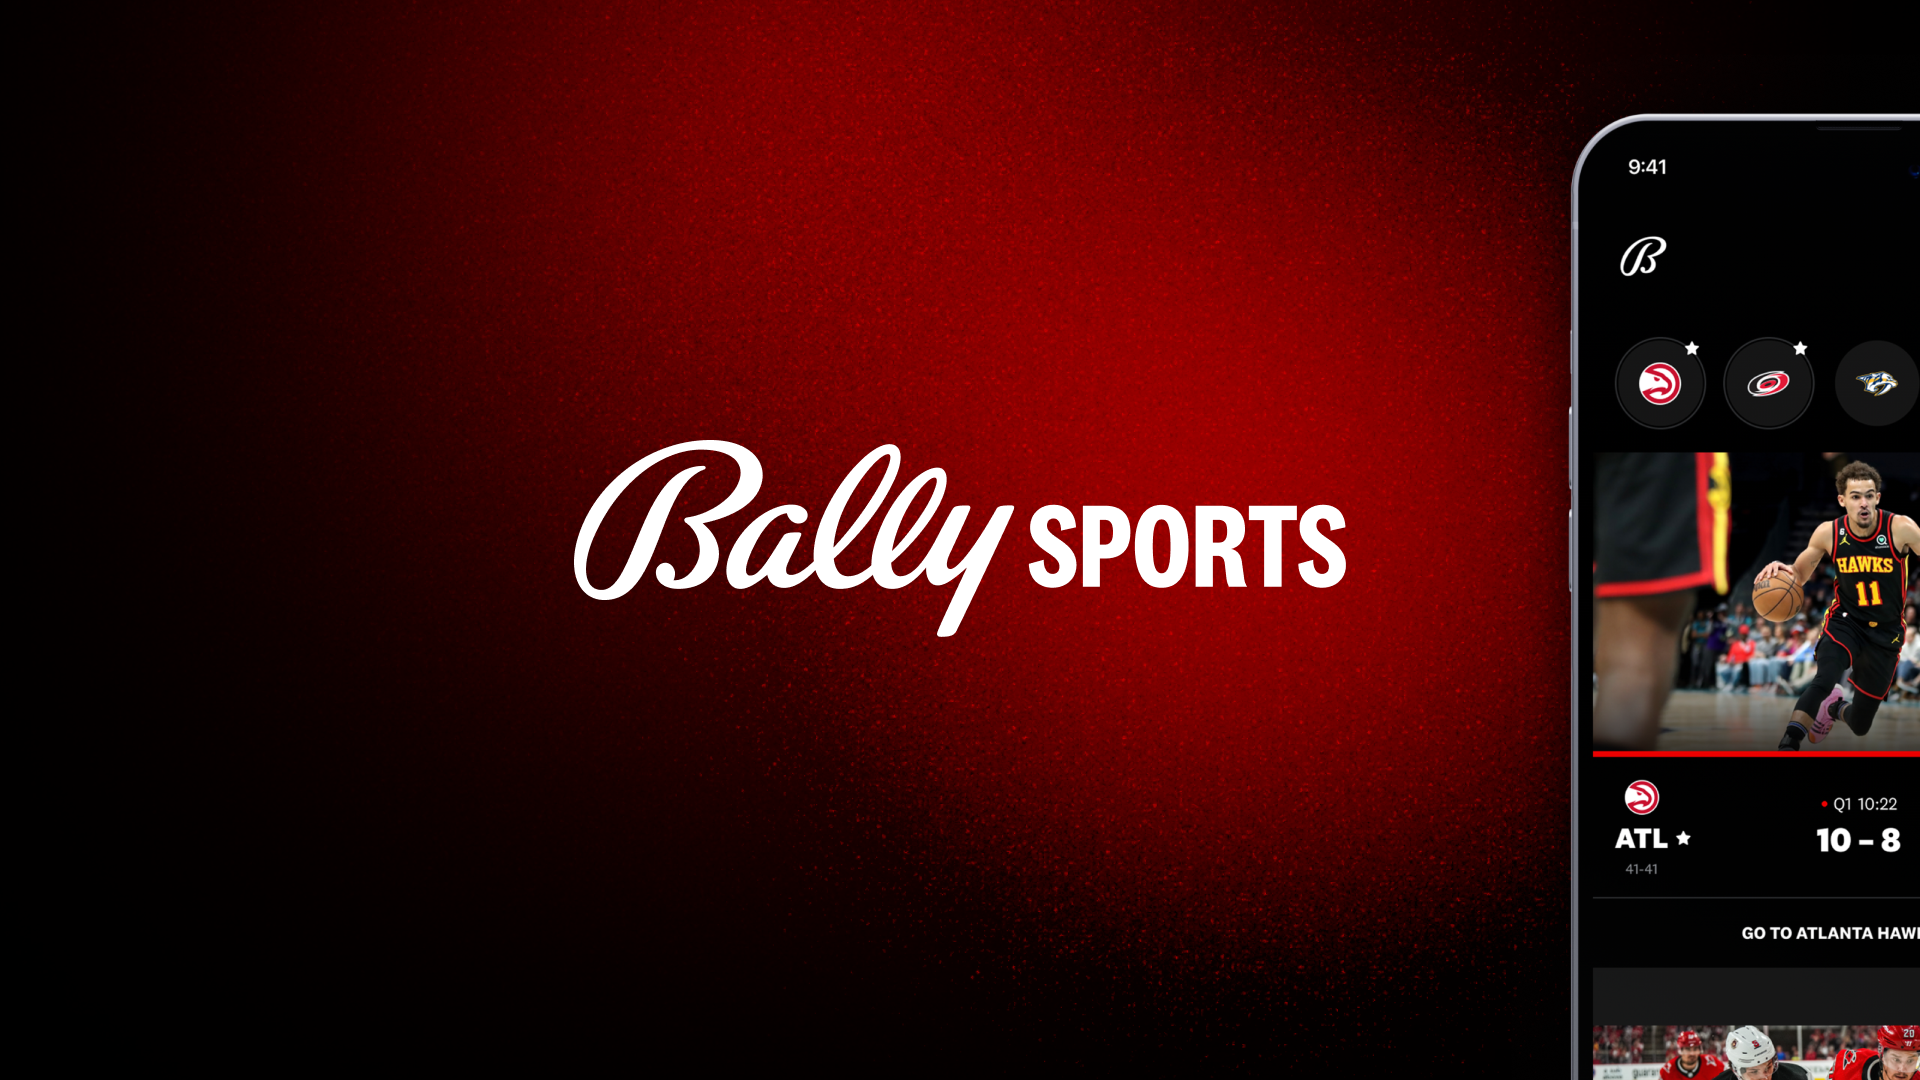 Bally Sports - Overview